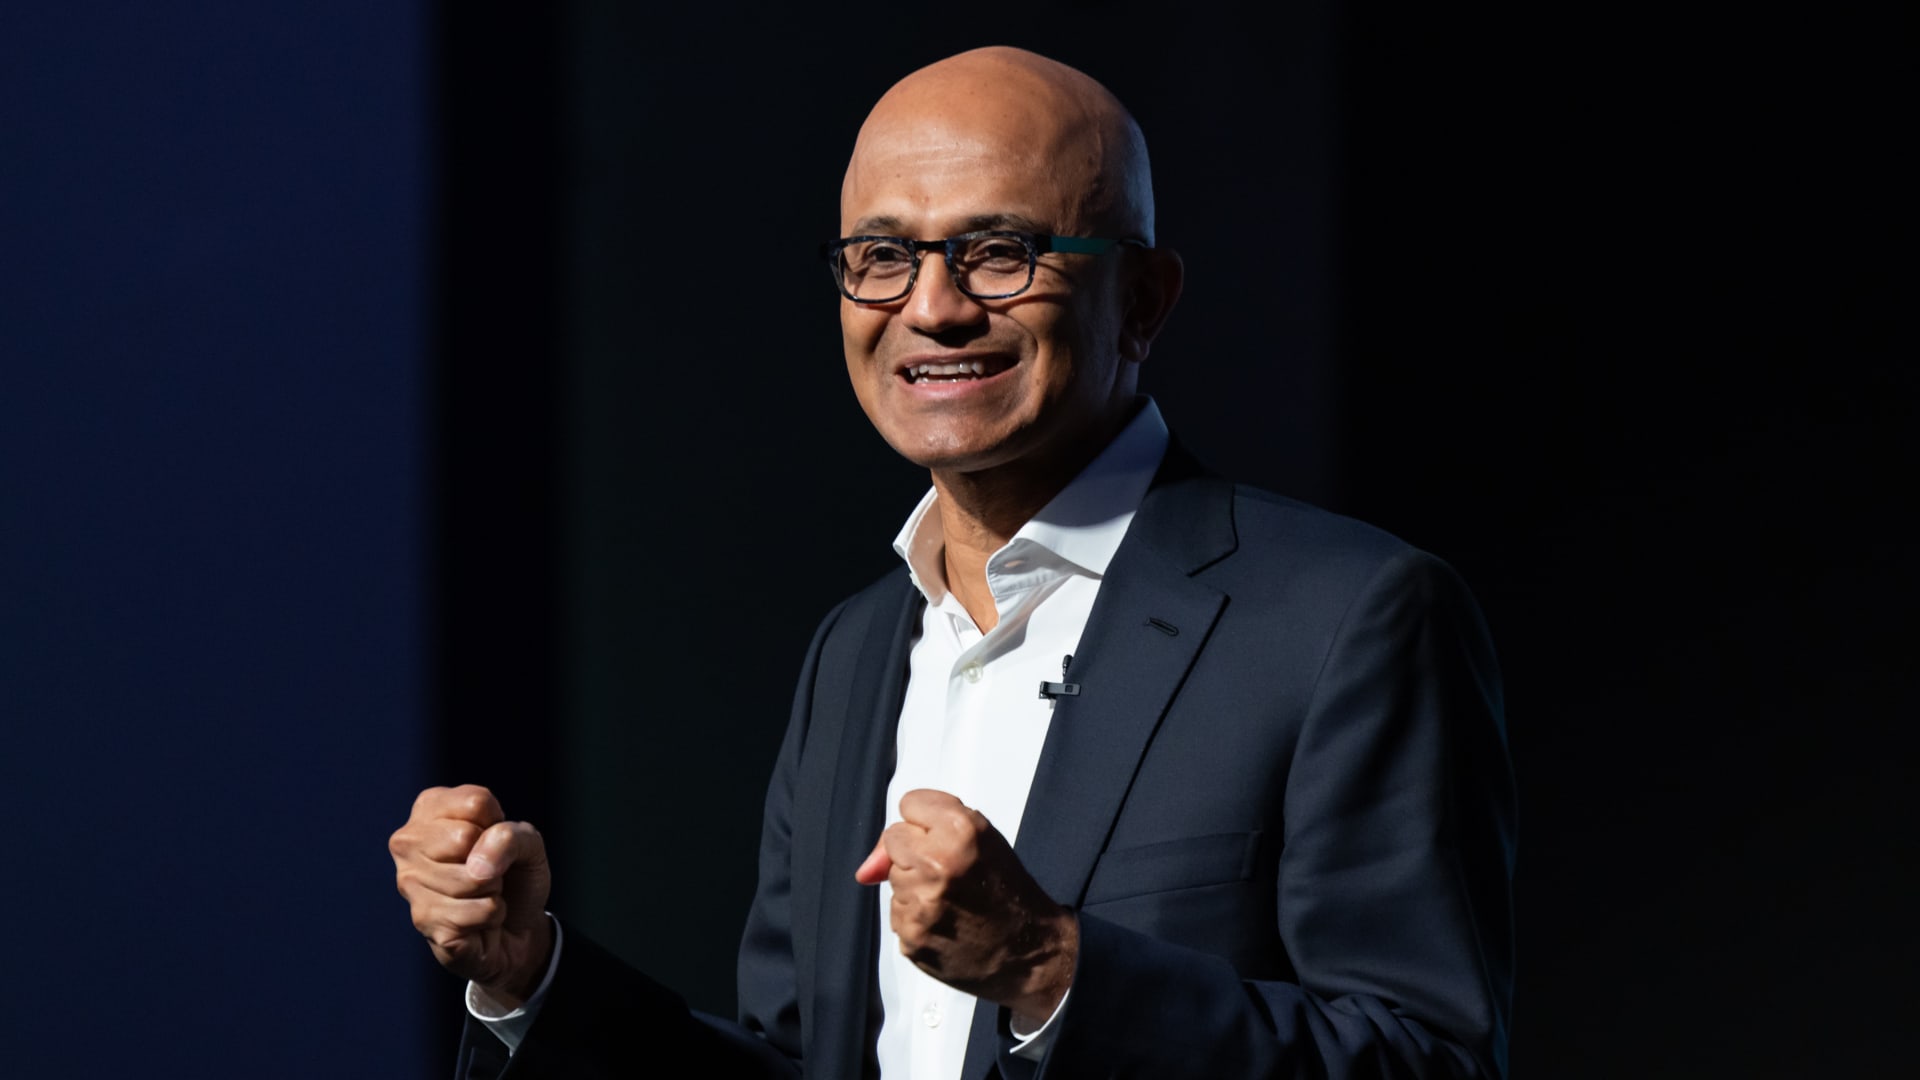 Microsoft offers lackluster guidance, says new business growth slowed in December